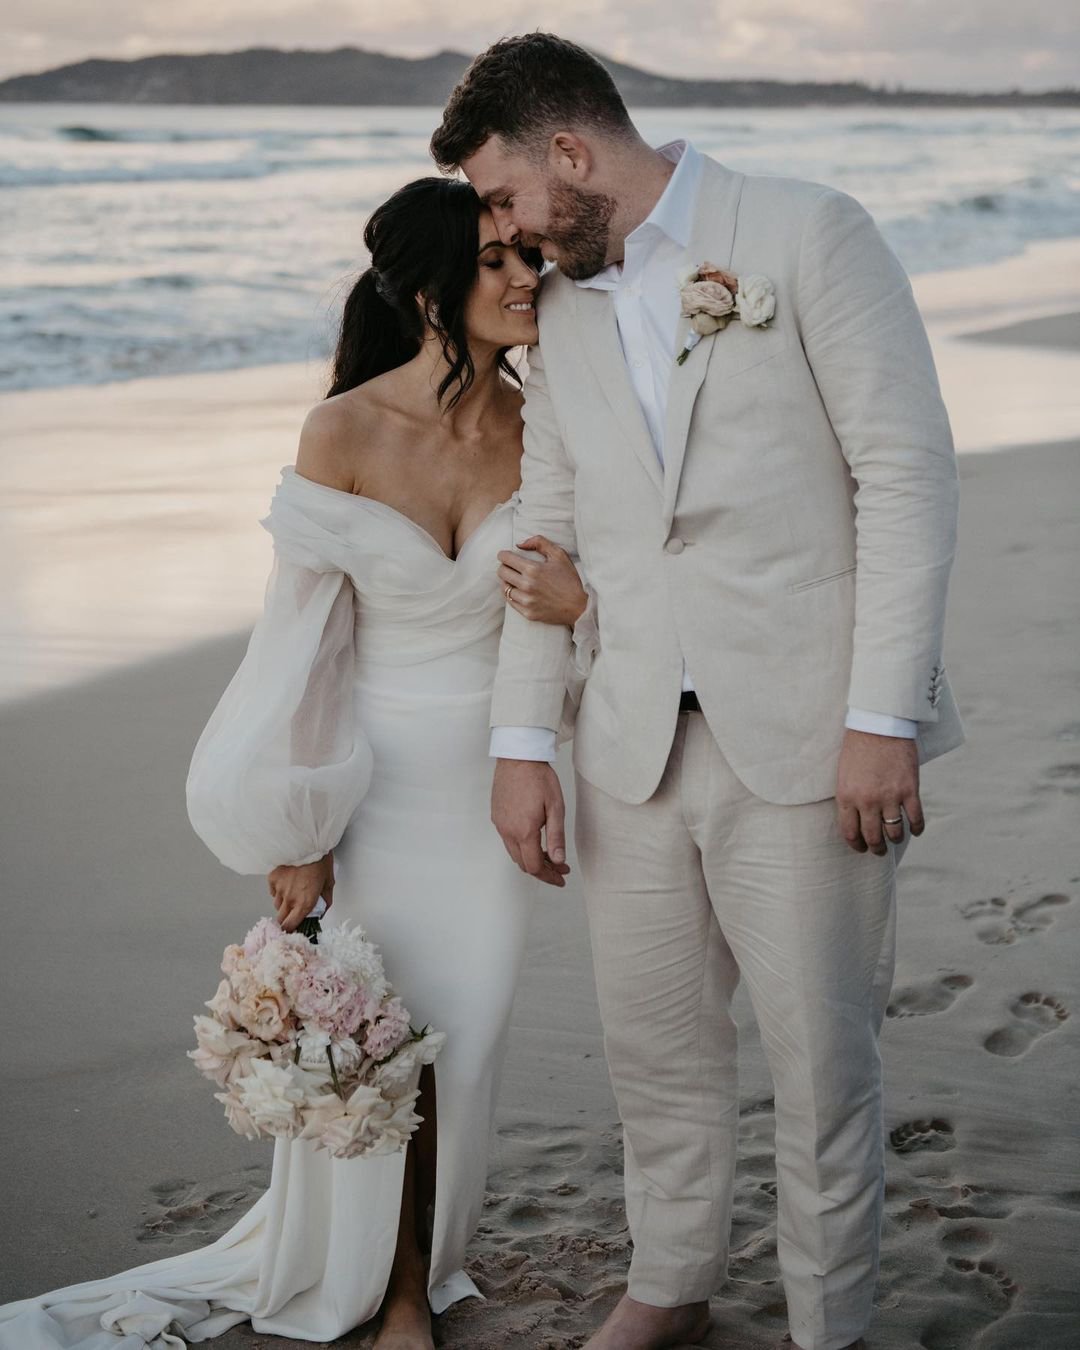 sweetheart neckline wedding dress simple with sleeves beach one day